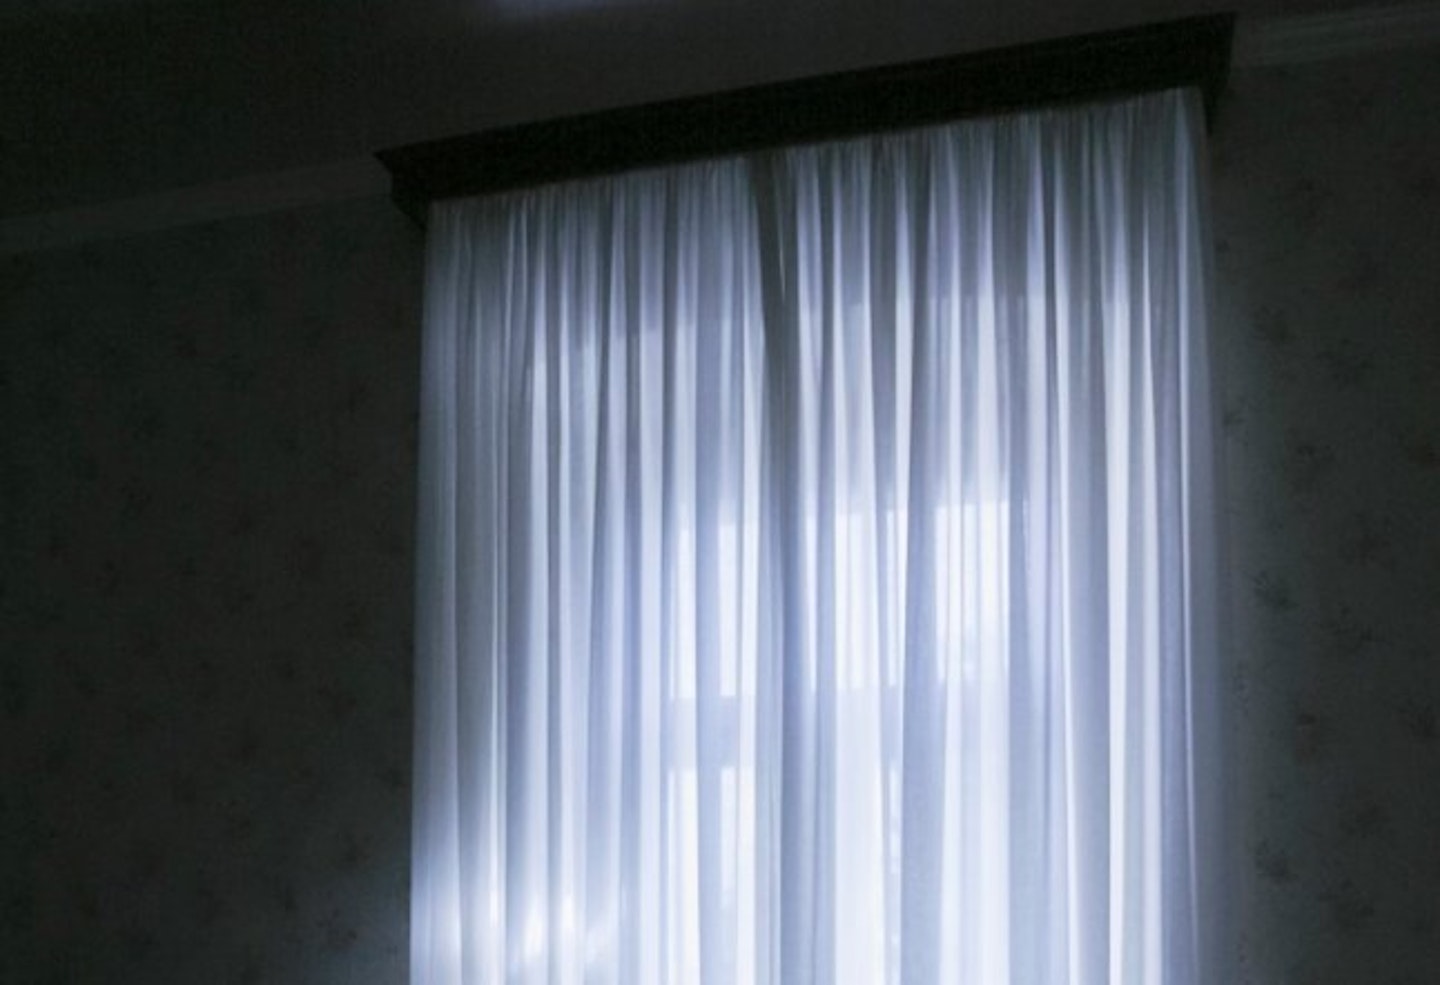 6) Shut the curtains during the day